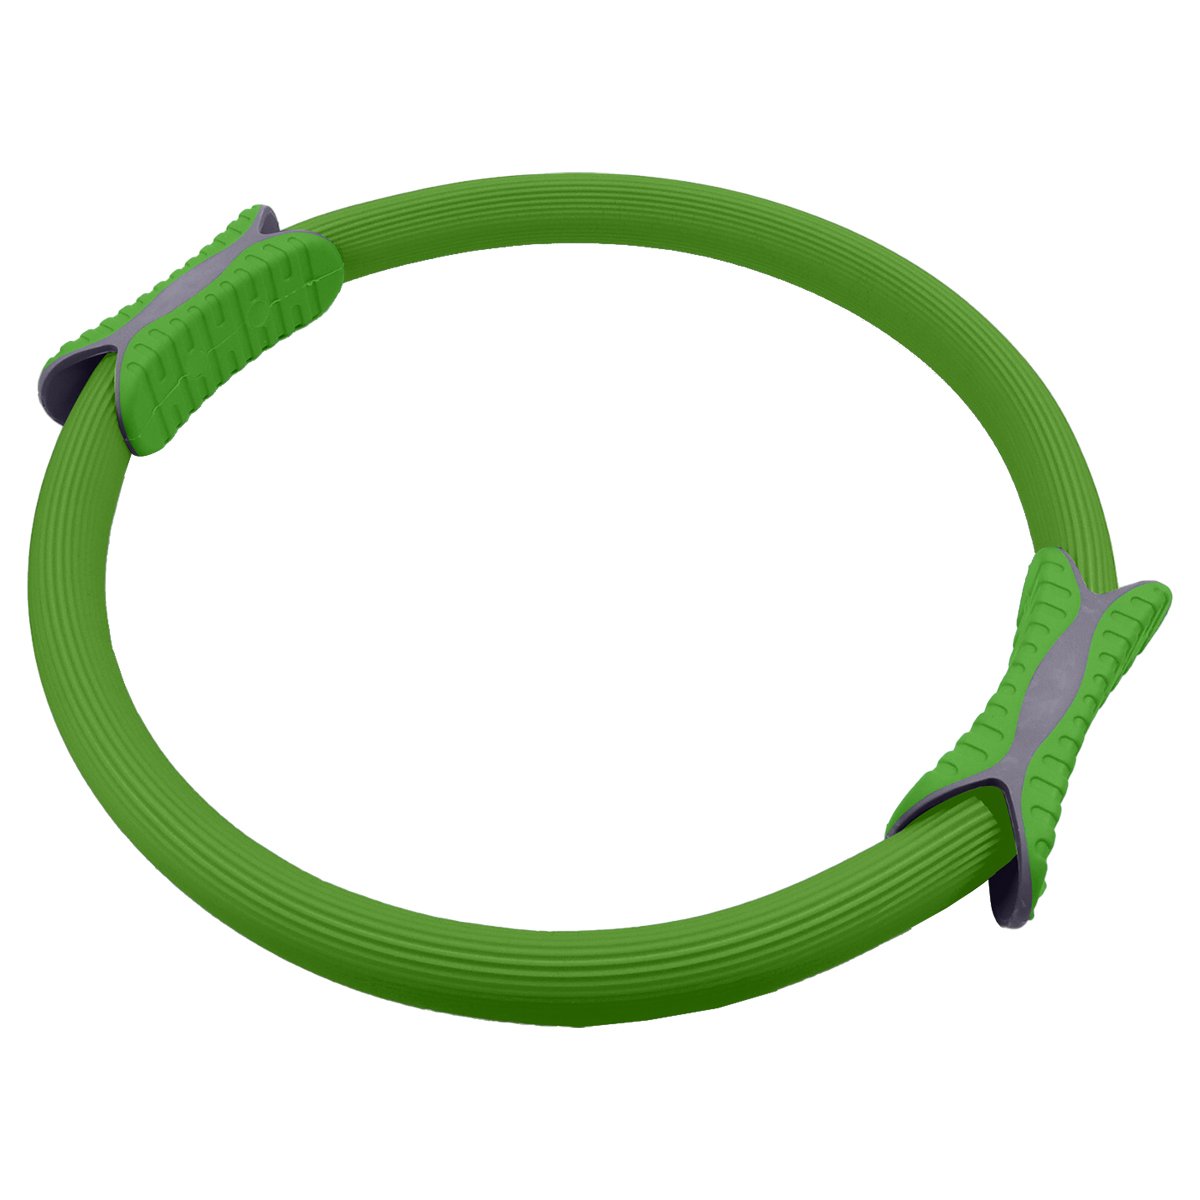 Powertrain Pilates Ring Band Yoga Home Workout Exercise Band Green 1